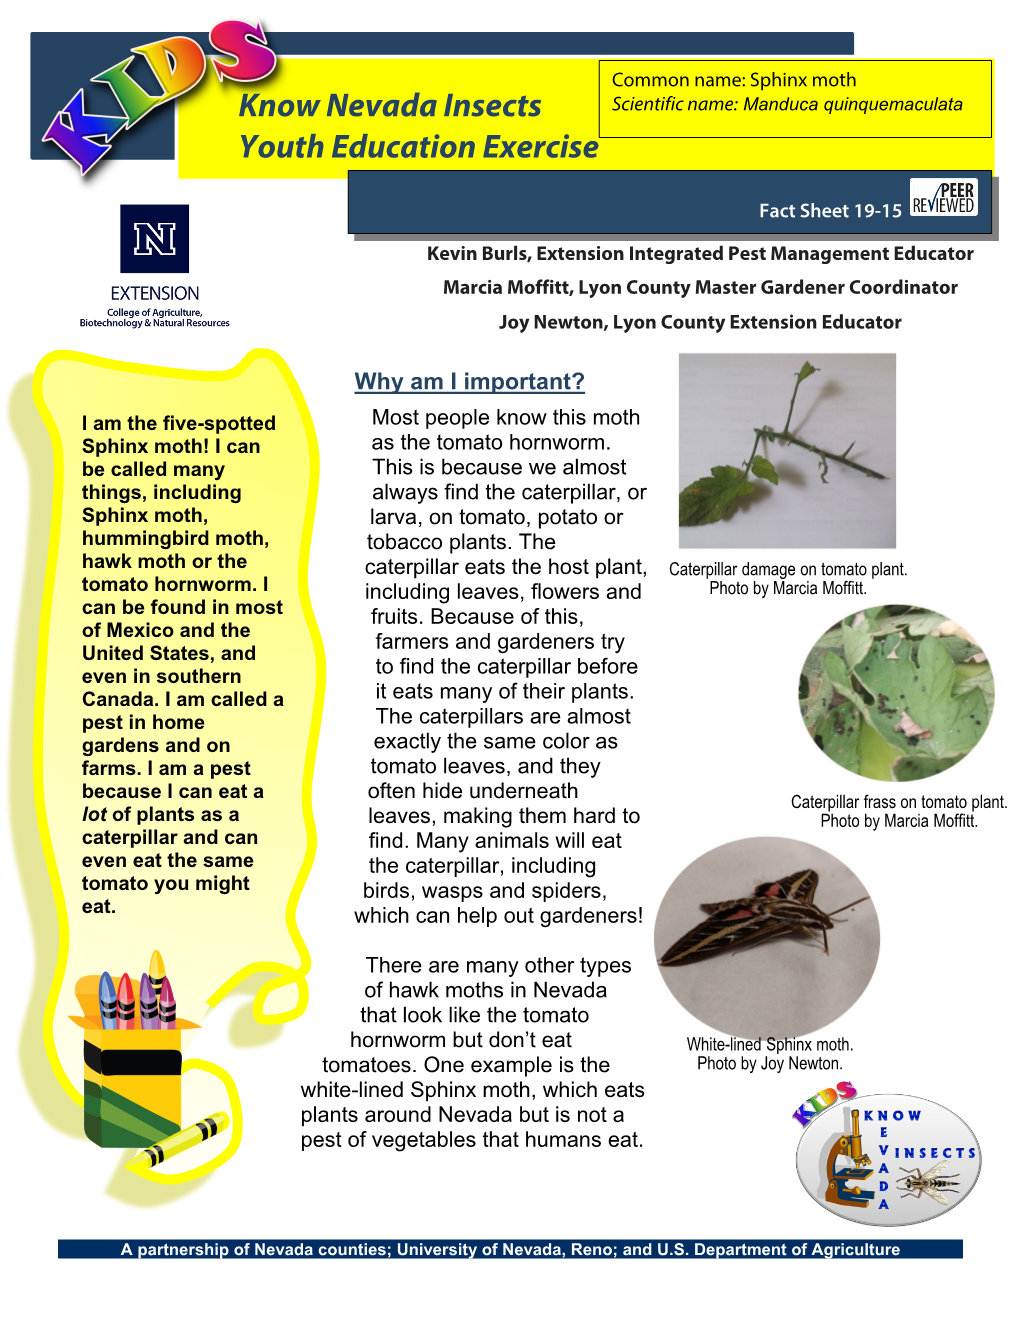 Know Nevada Insects Youth Exercise: Sphinx Moths